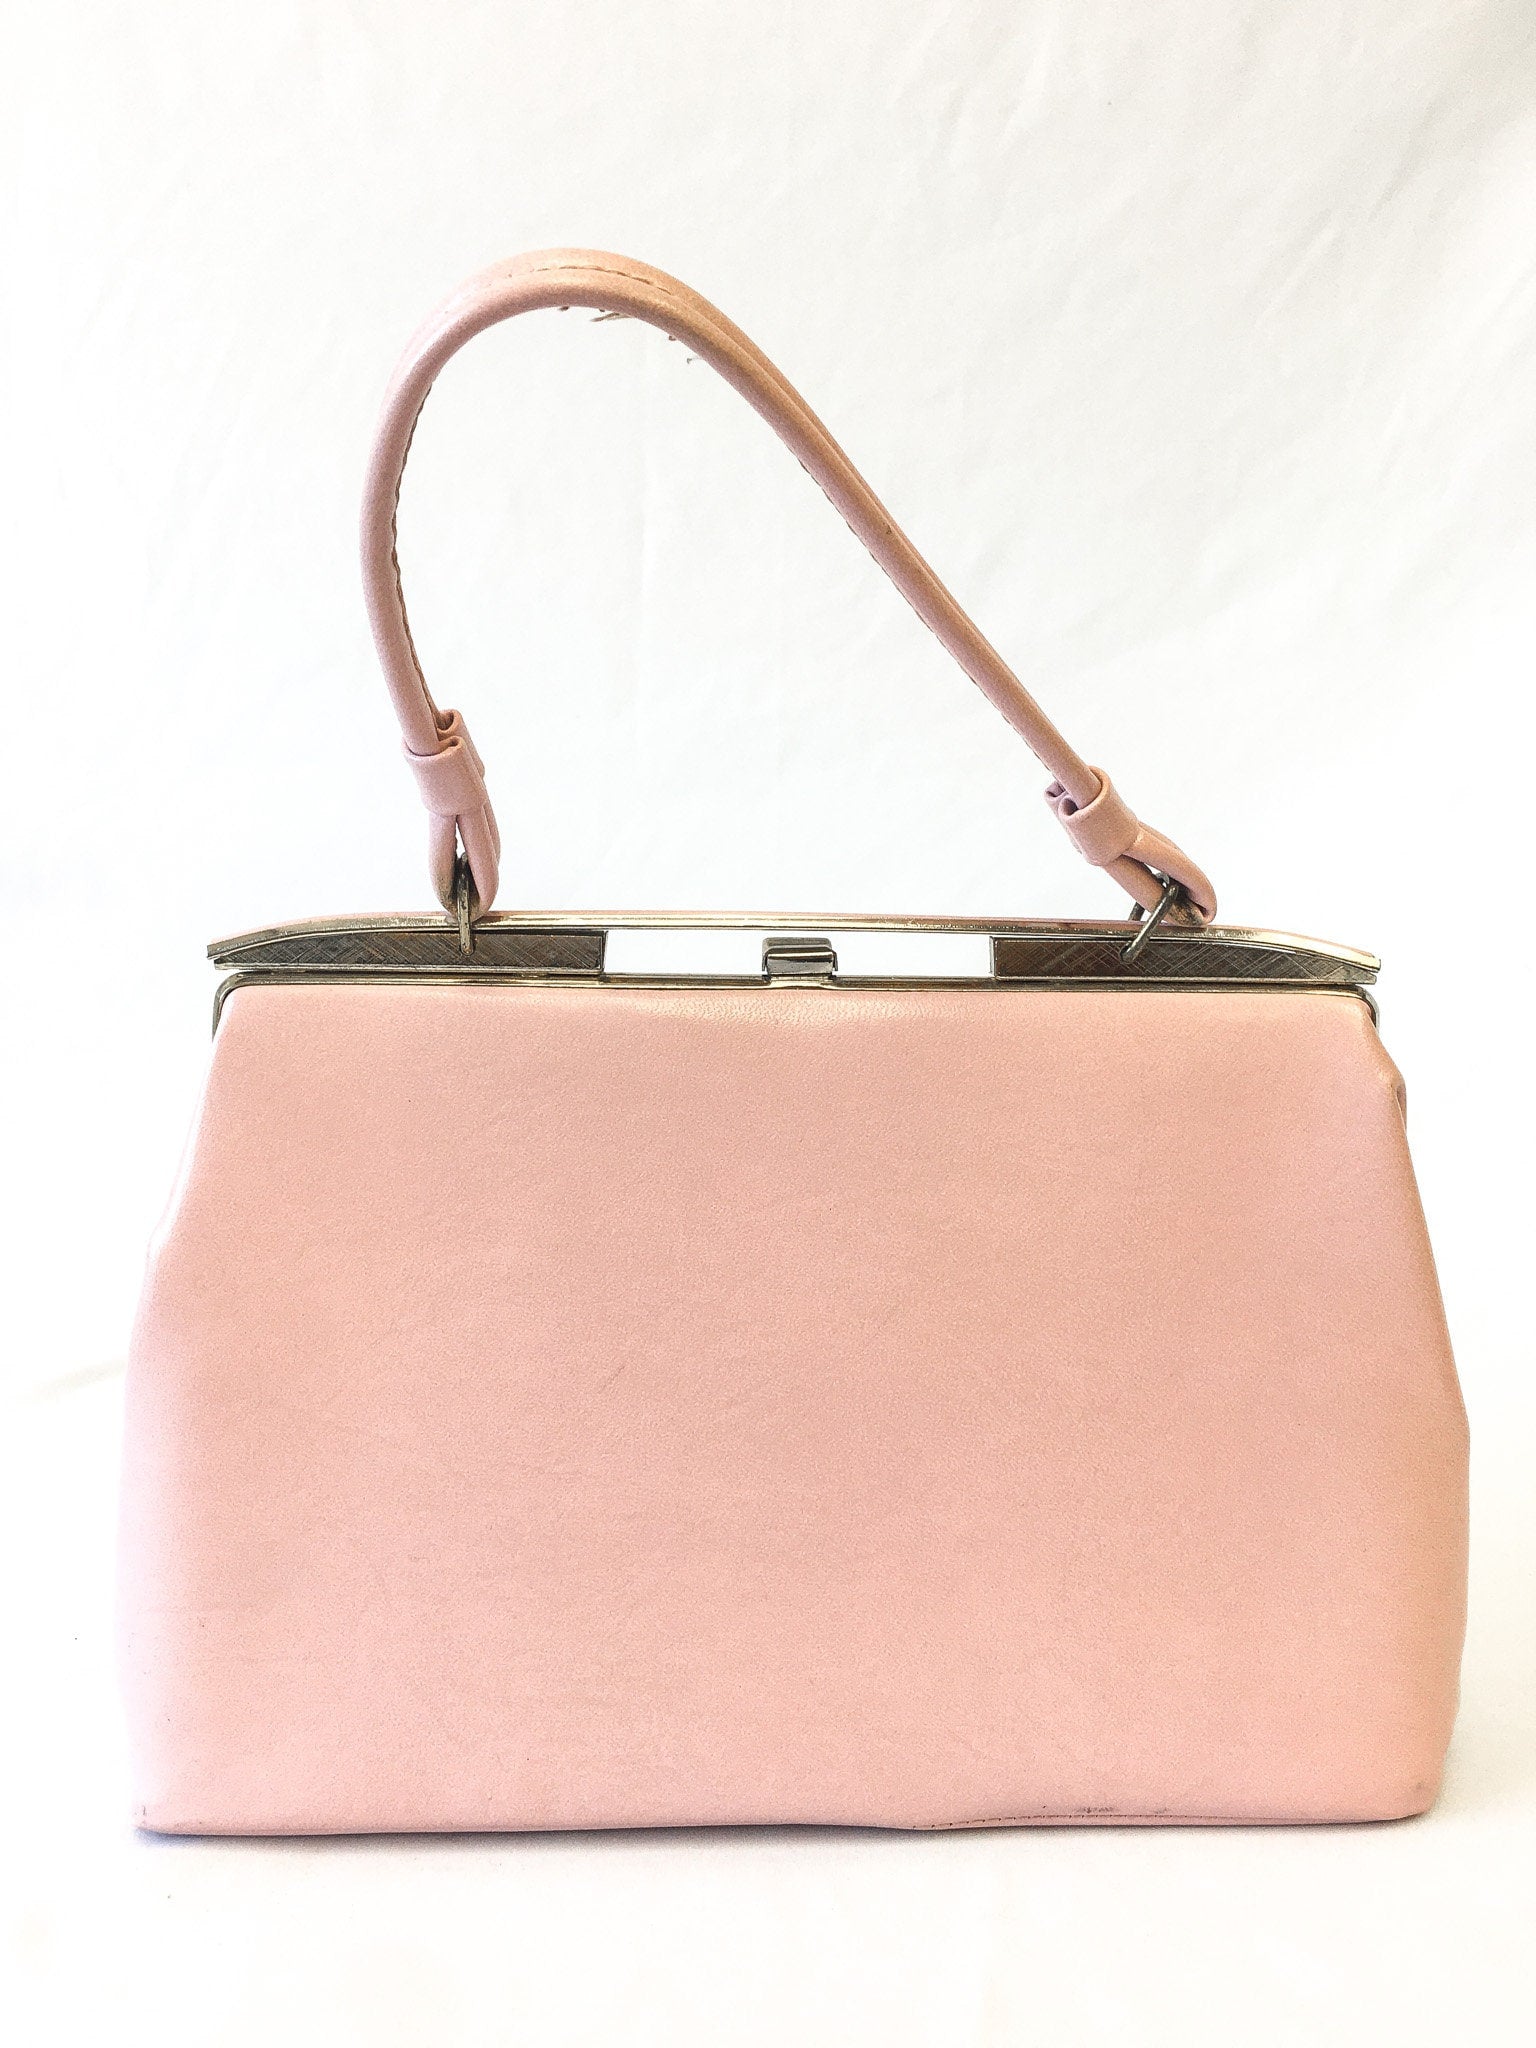 Vintage 60s Baby Pink Leather Top Handle Purse, 60s Leather Handbag